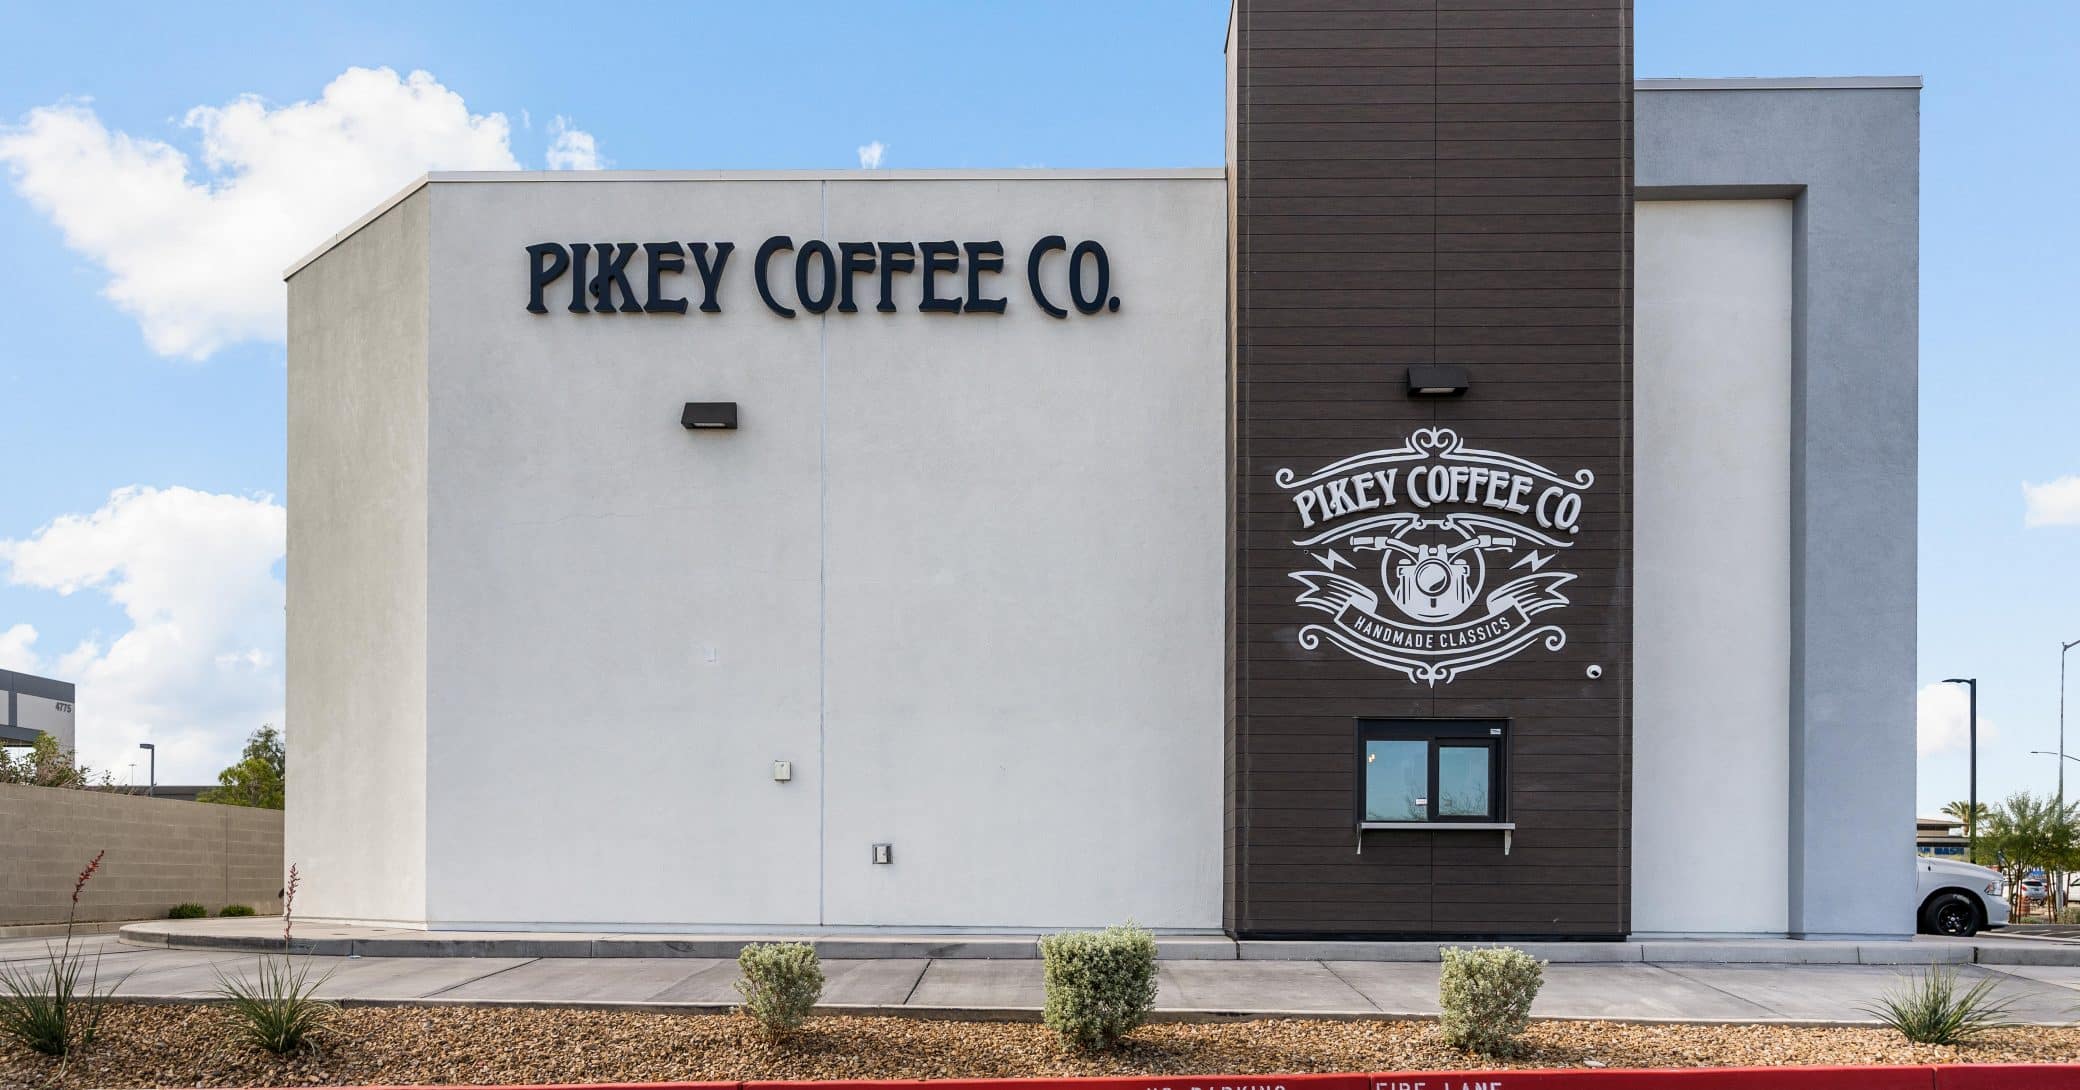 Kalb Industries completed an restaurant tenant improvement for Pikey Coffee Co.